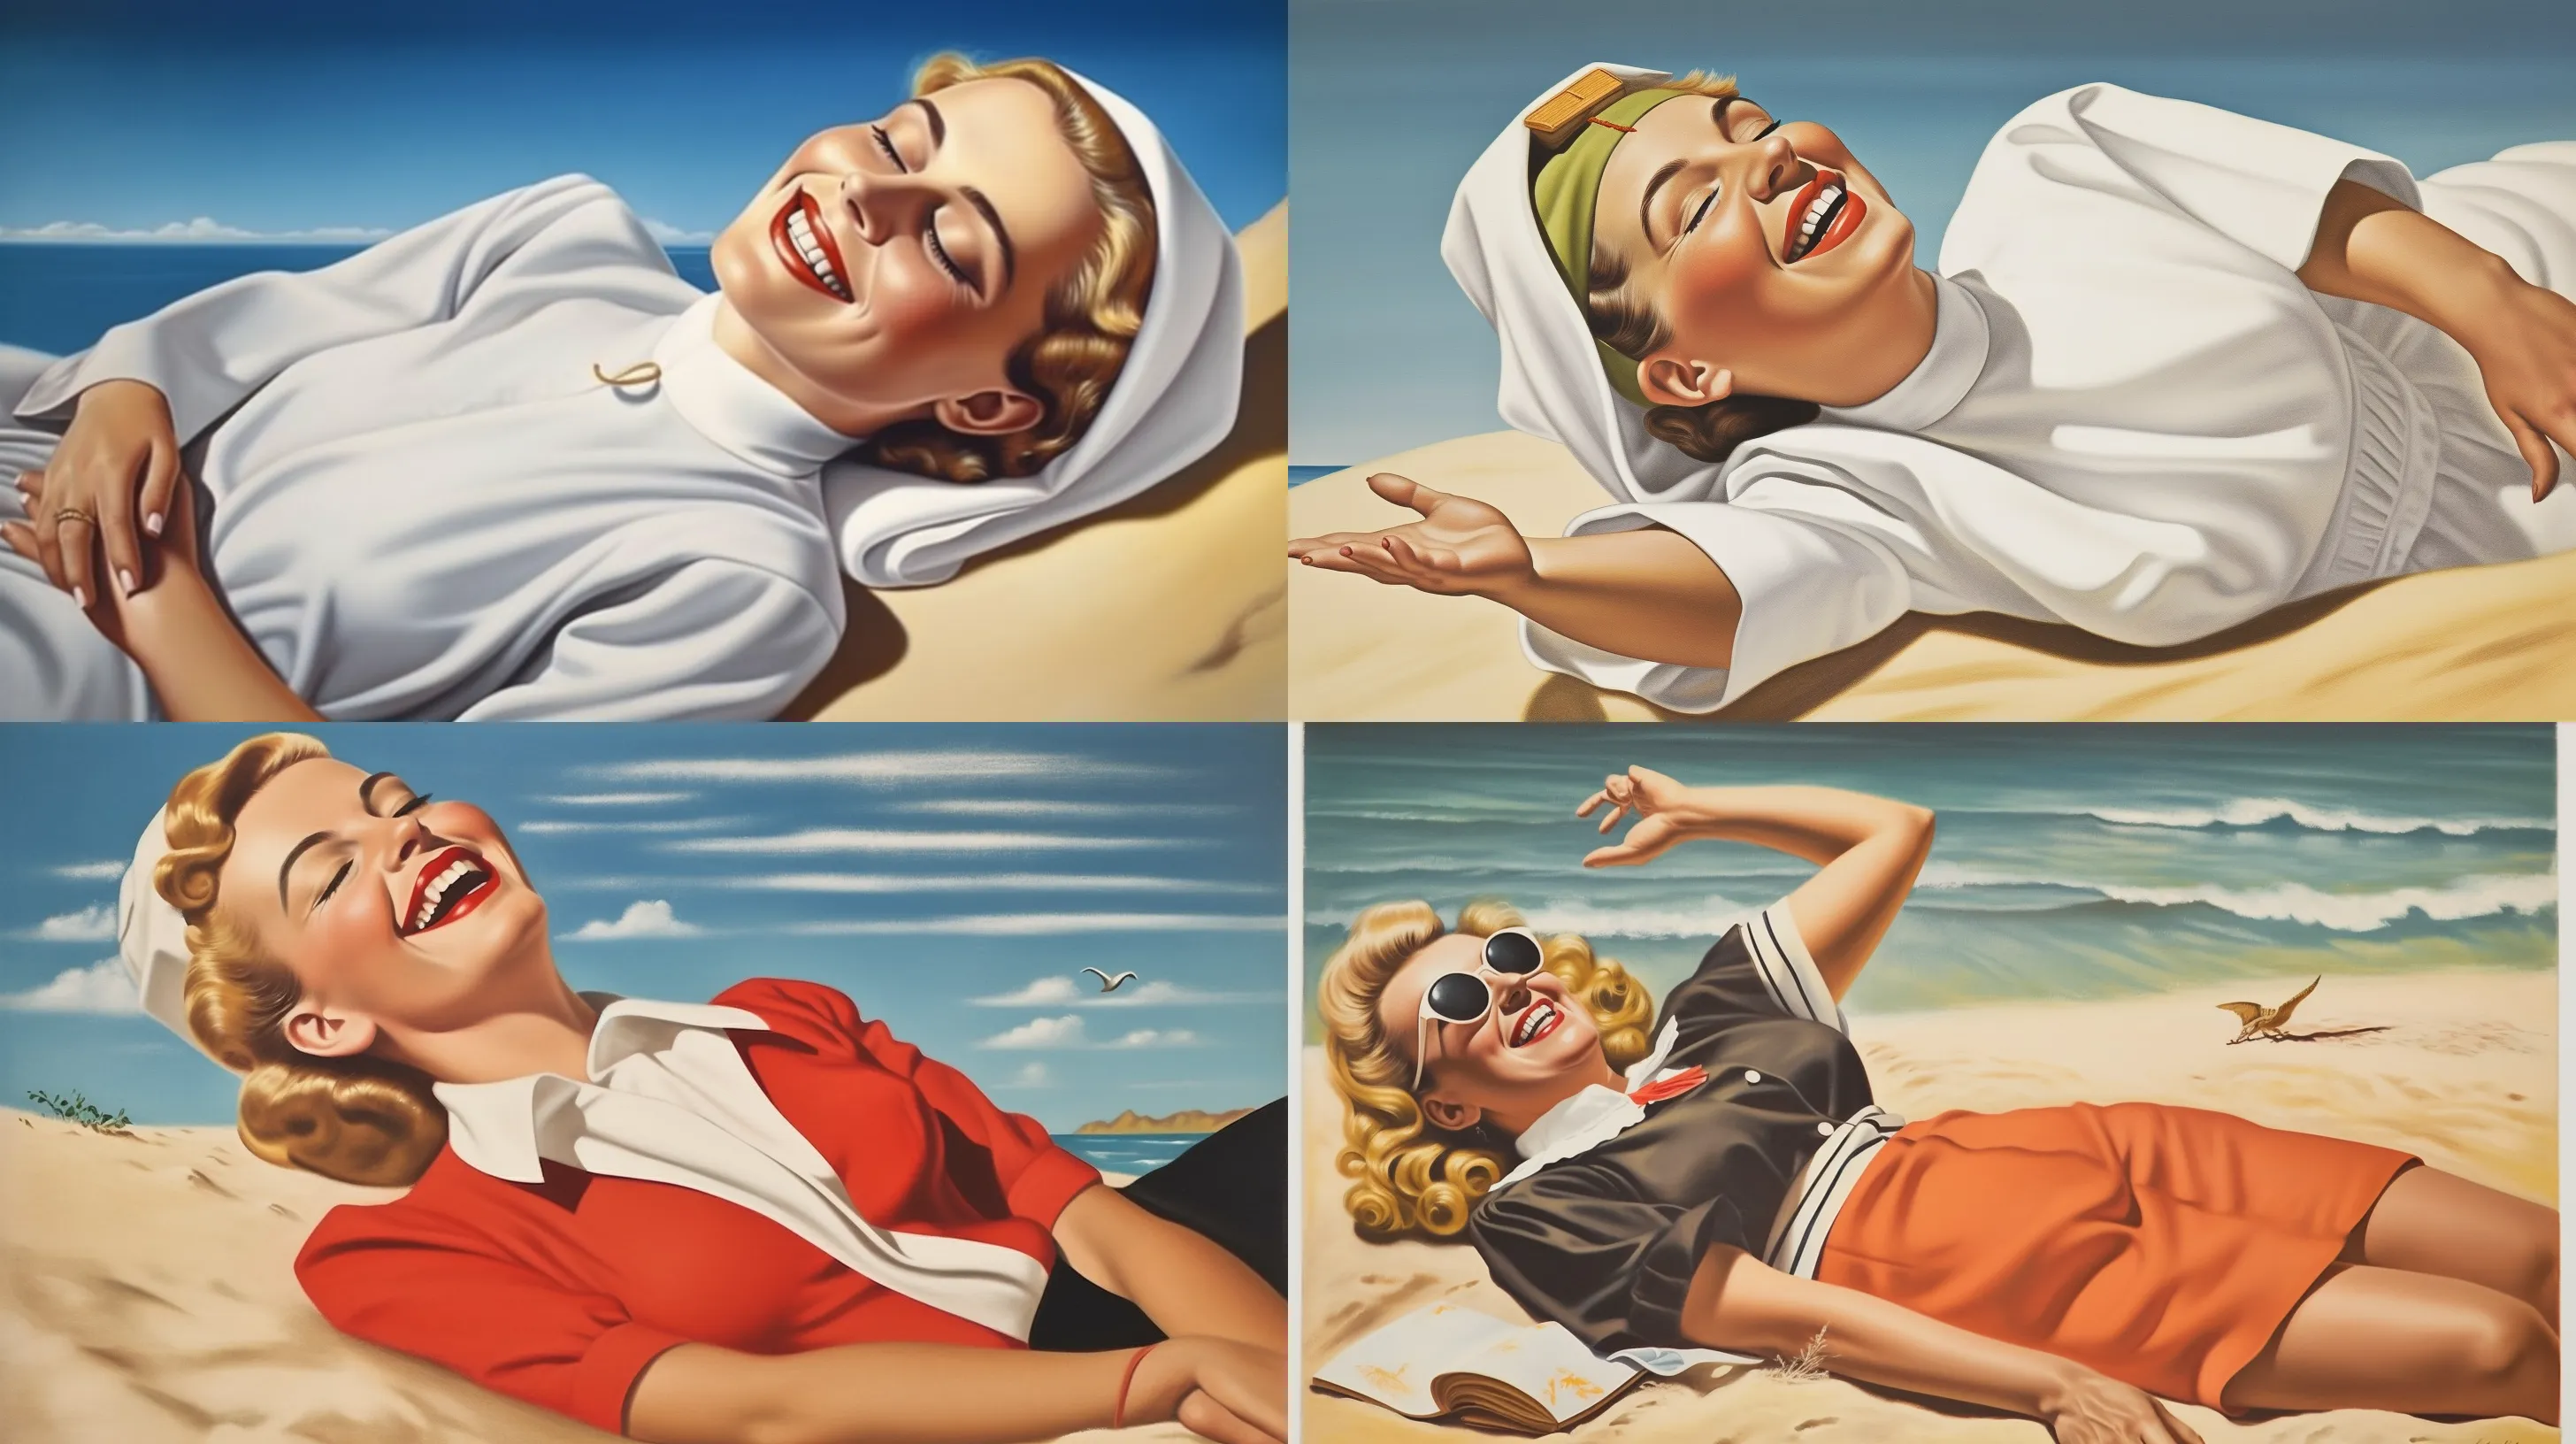 Four thumbnail renders of a nun laying on the beach. The first looks reasonable, the other three have deformed hands, strange shoulders, or awkward poses.